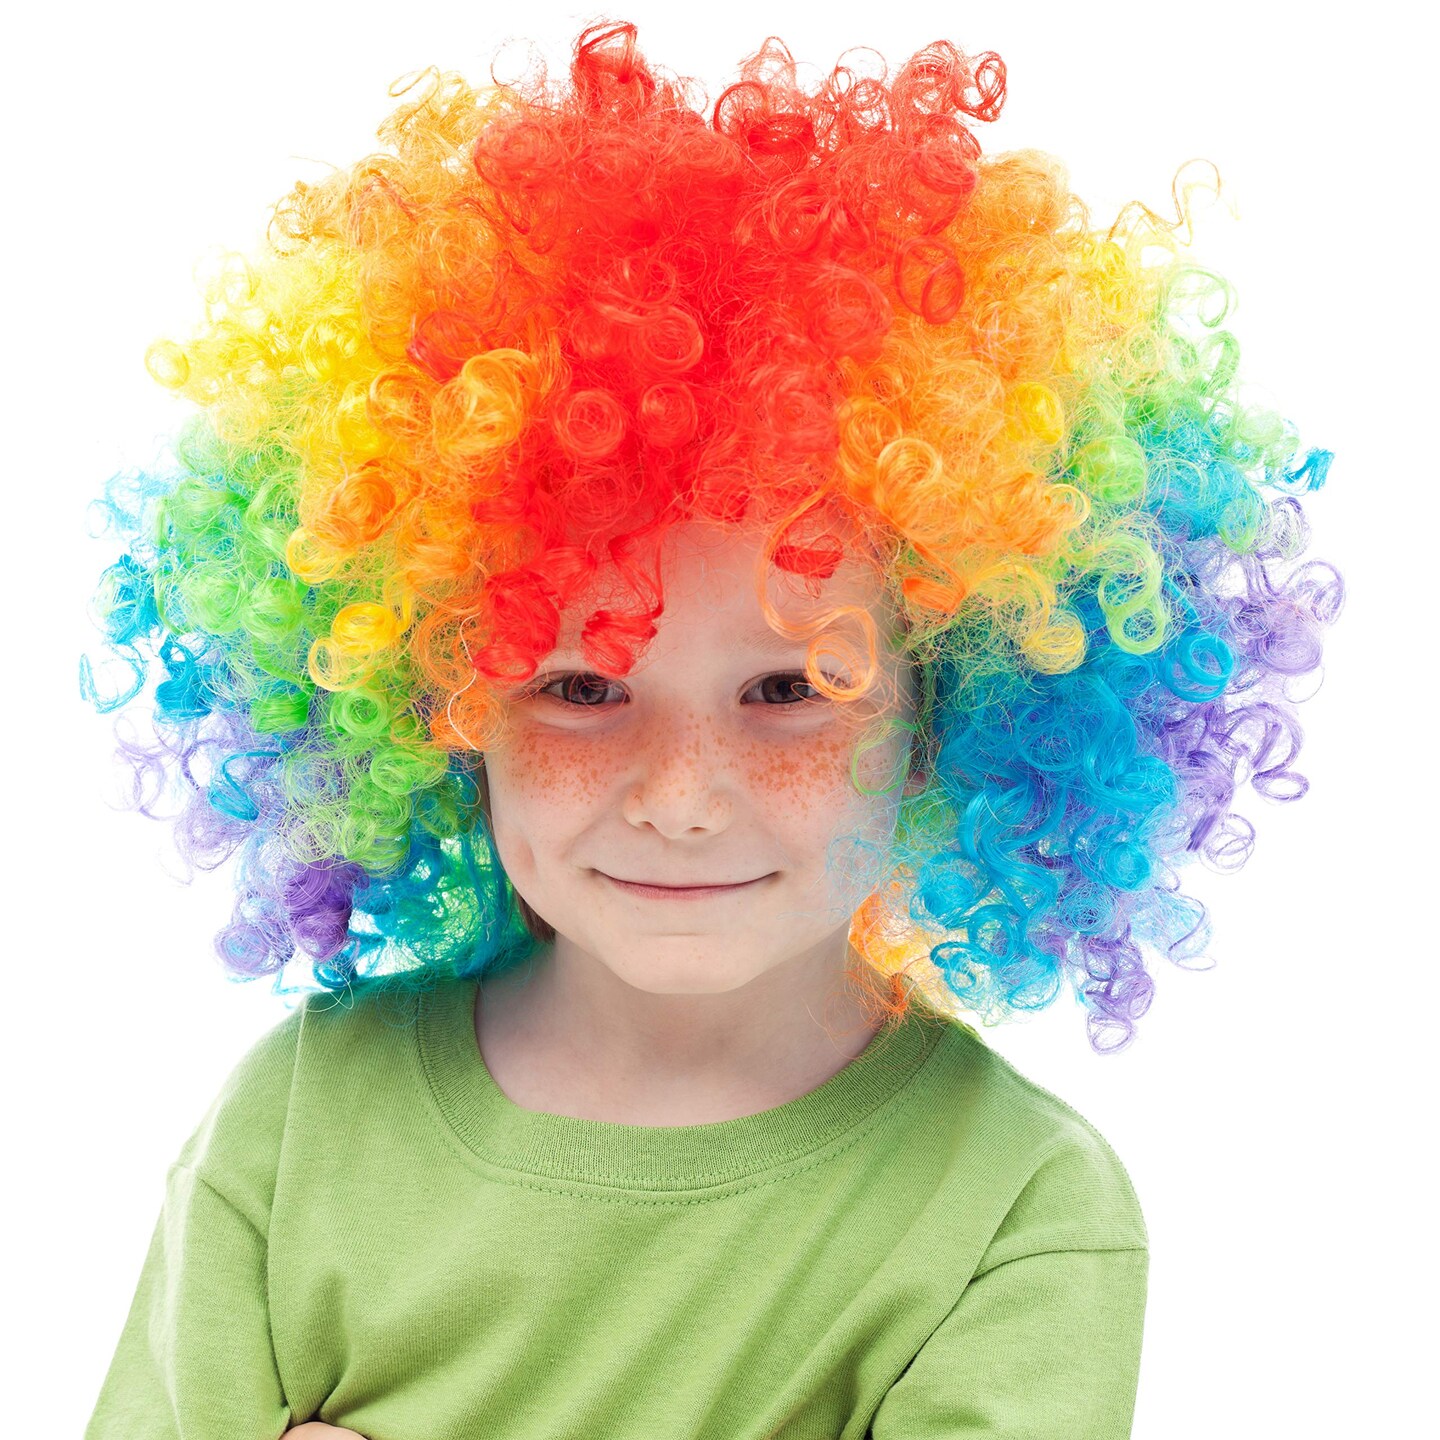 Colorful Clown Costume Wig - Multicolored Afro Clown Wig Costume Accessories for Kids and Adults